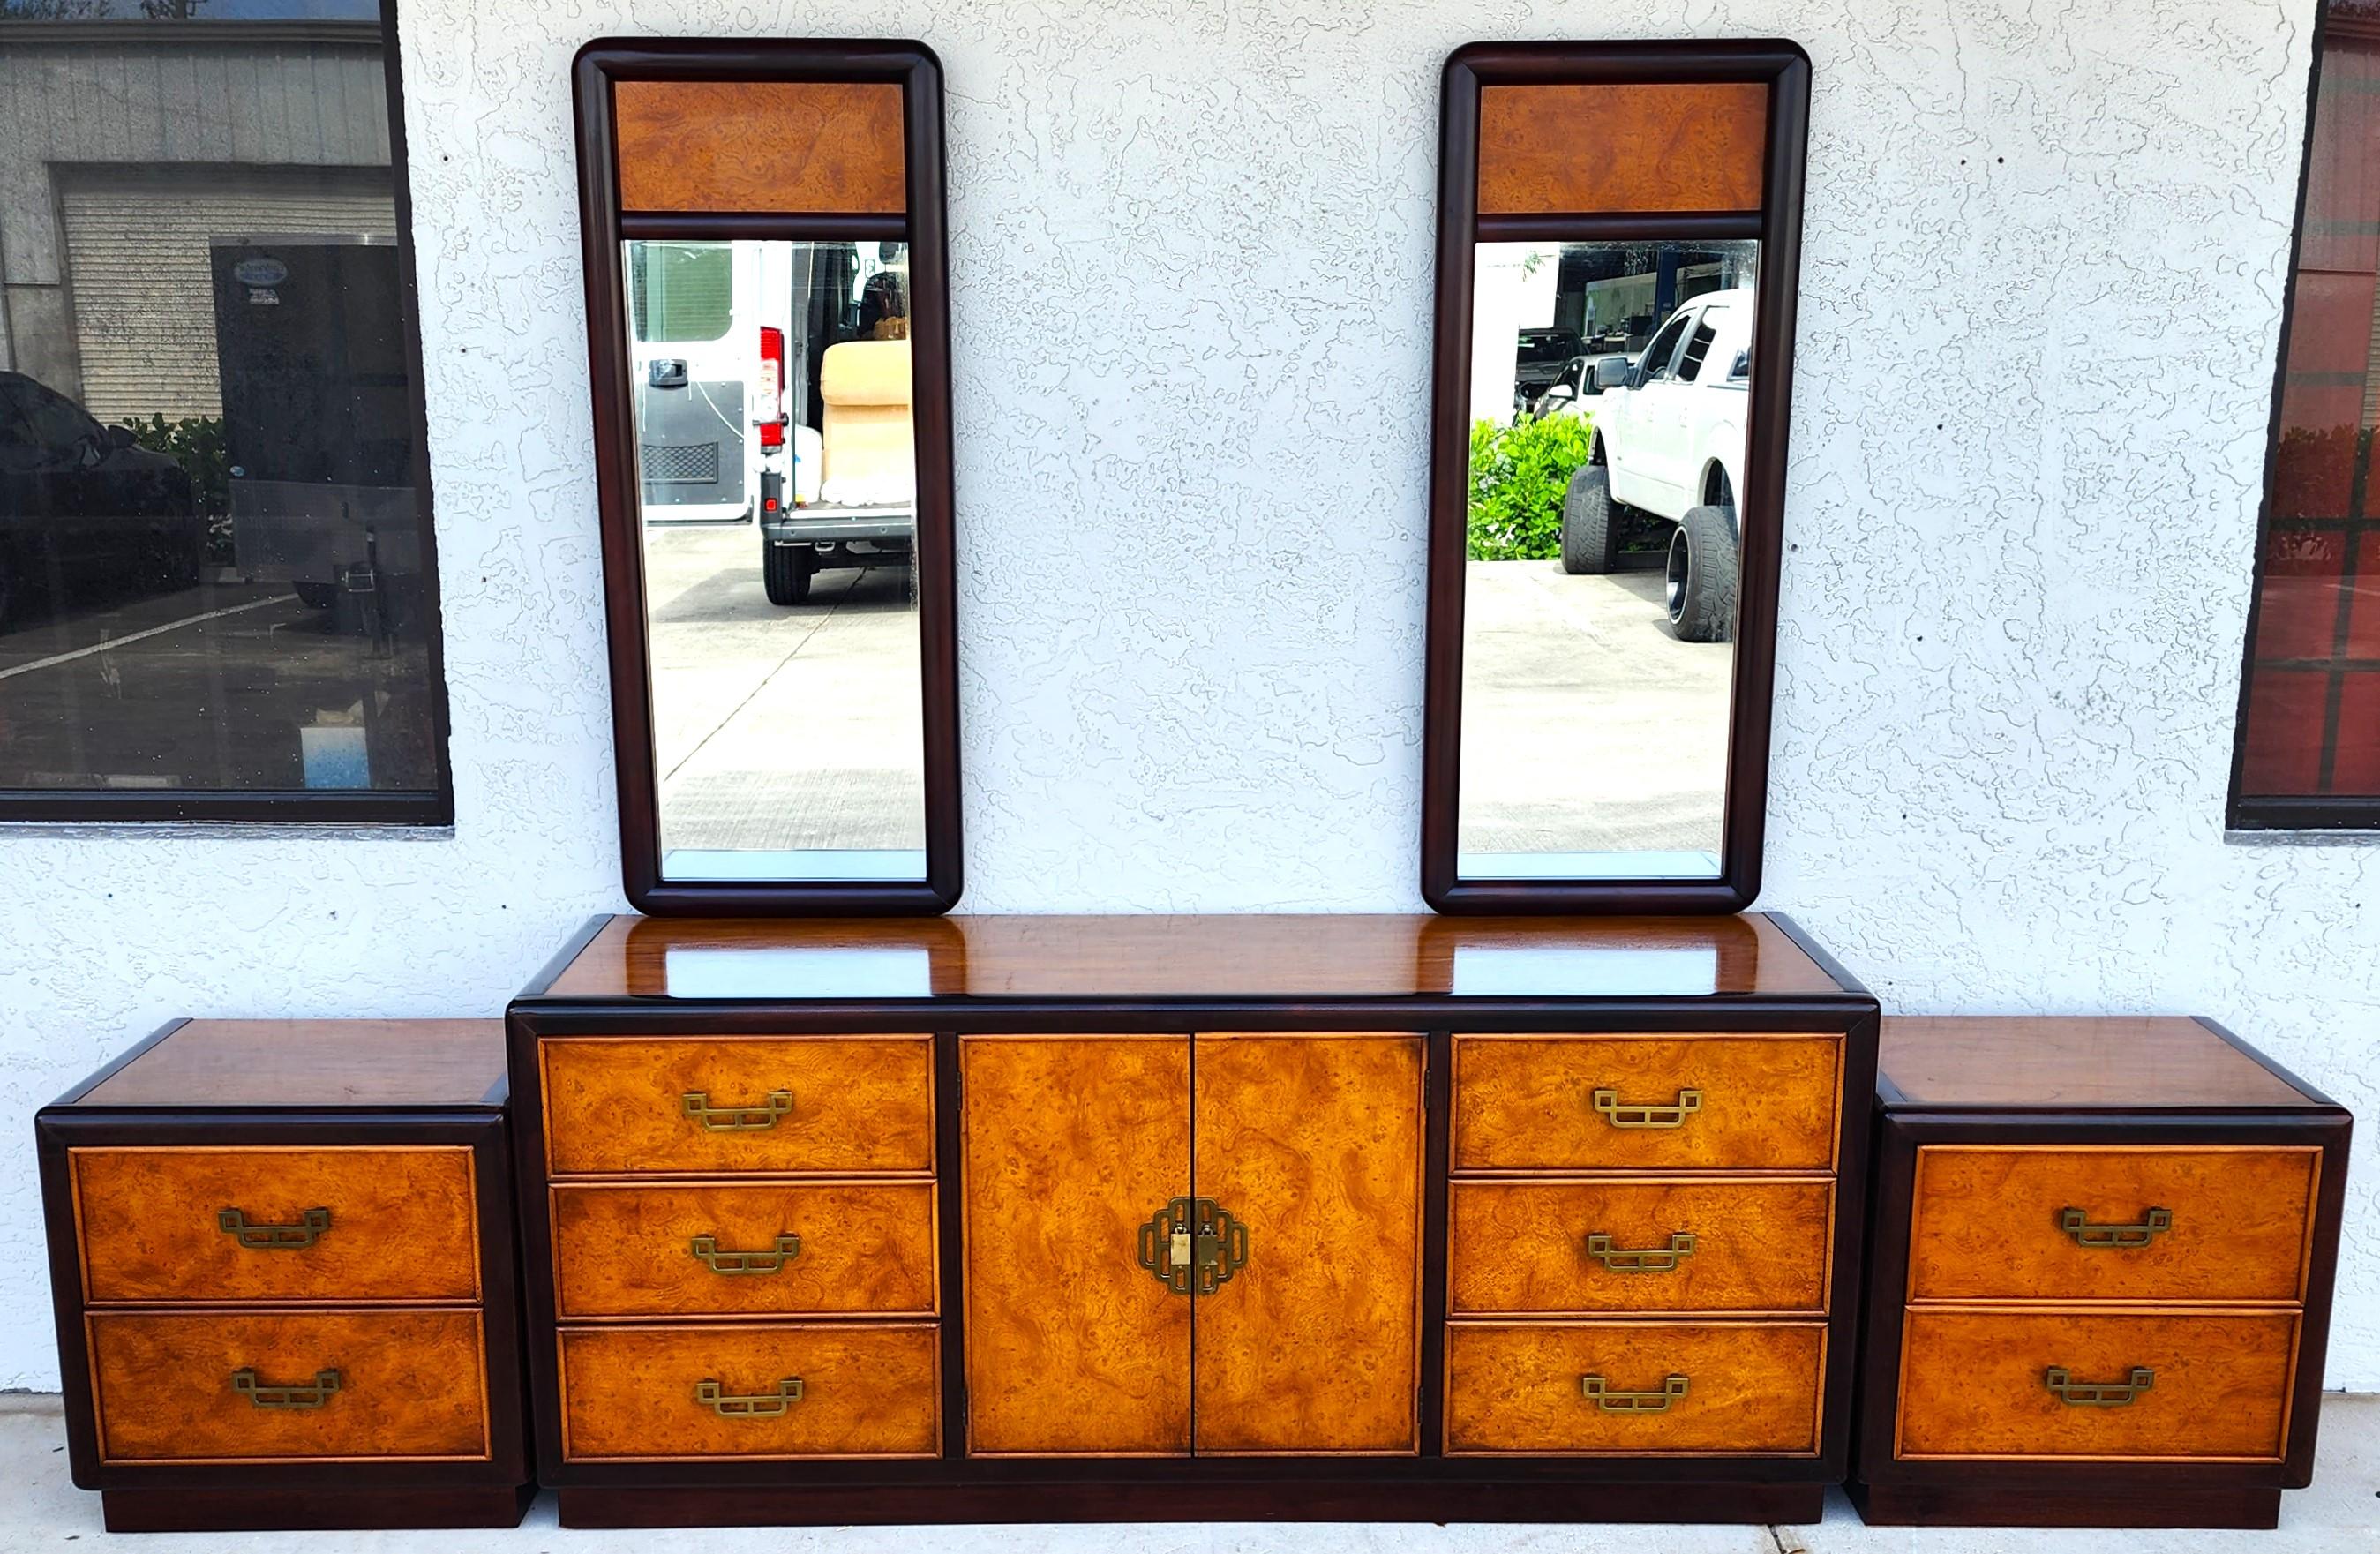 For FULL item description click on CONTINUE READING at the bottom of this page.

Offering One Of Our Recent Palm Beach Estate Fine Furniture Acquisitions Of A
Vintage 5 Piece Bedroom Set by Dixie Furniture
Set includes a 9-drawer dresser with 2